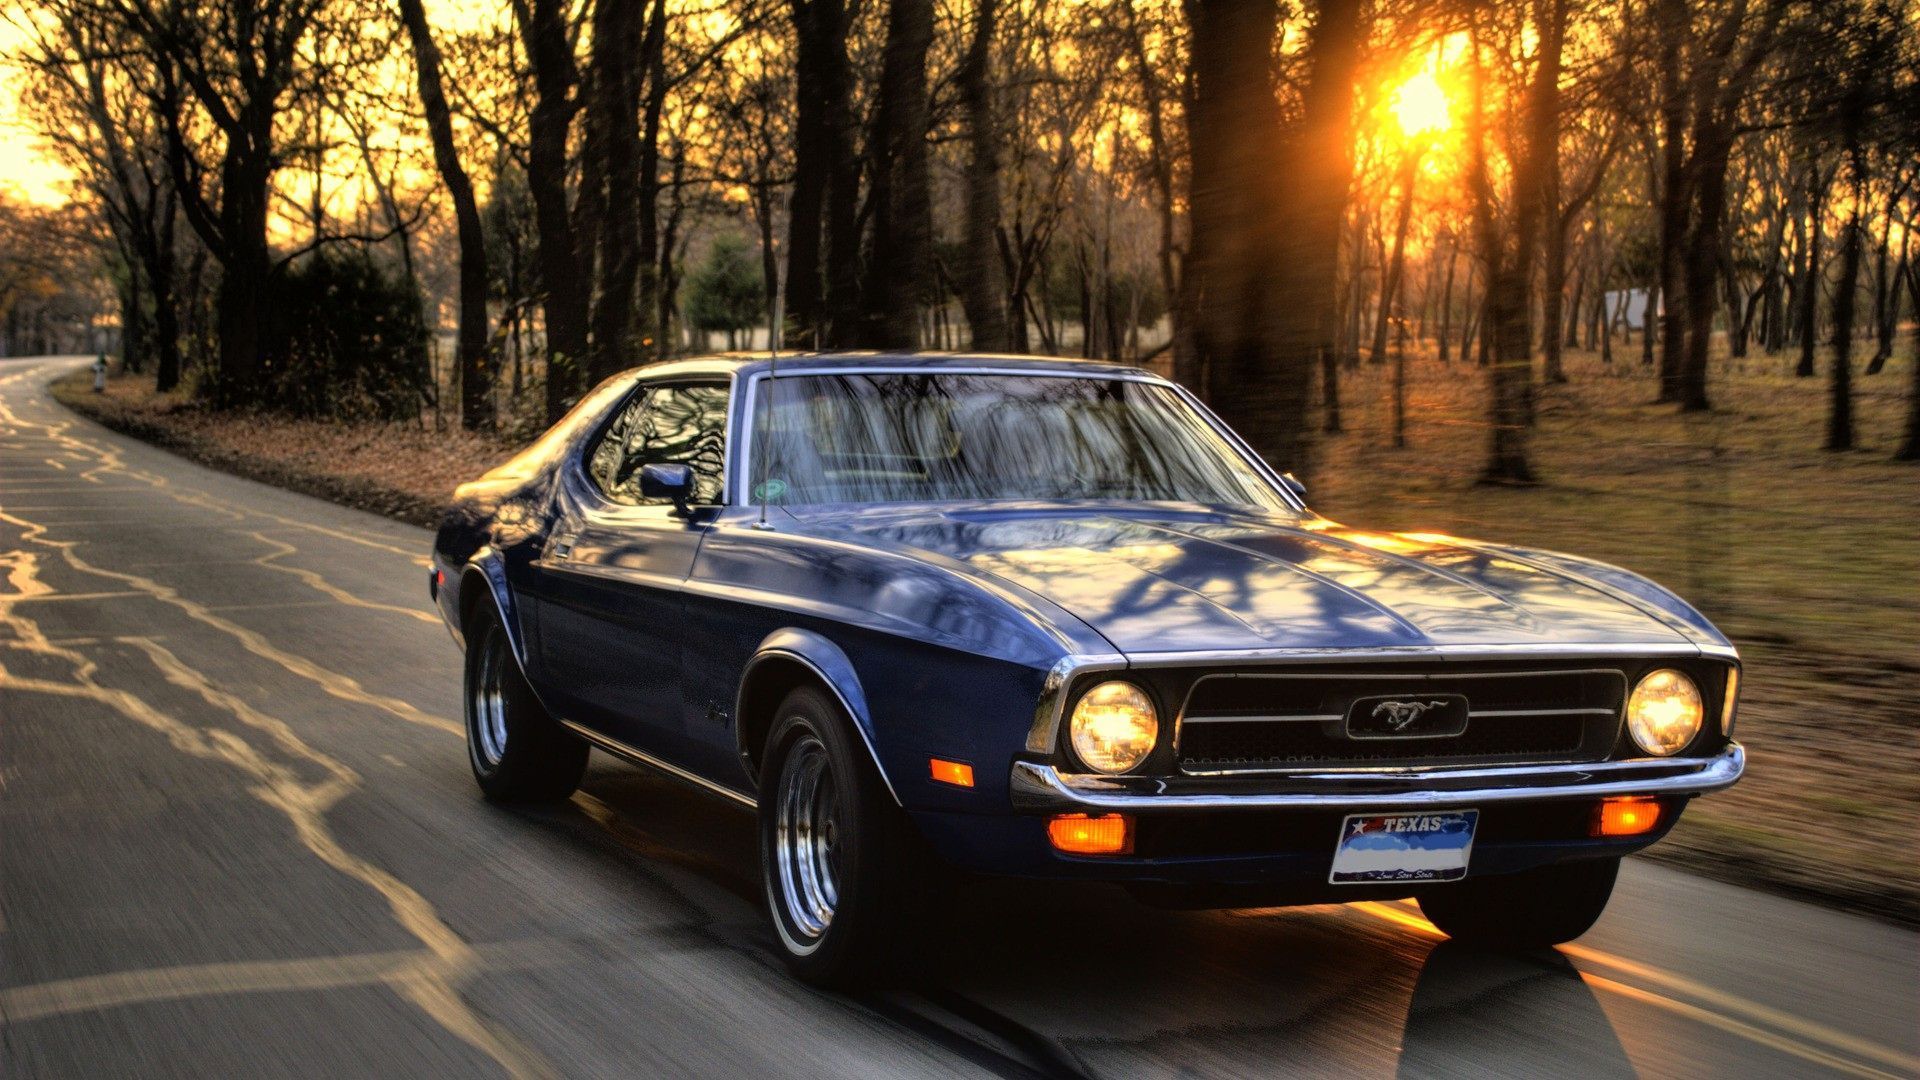 Classic Muscle Car Wallpaper Background. Classic